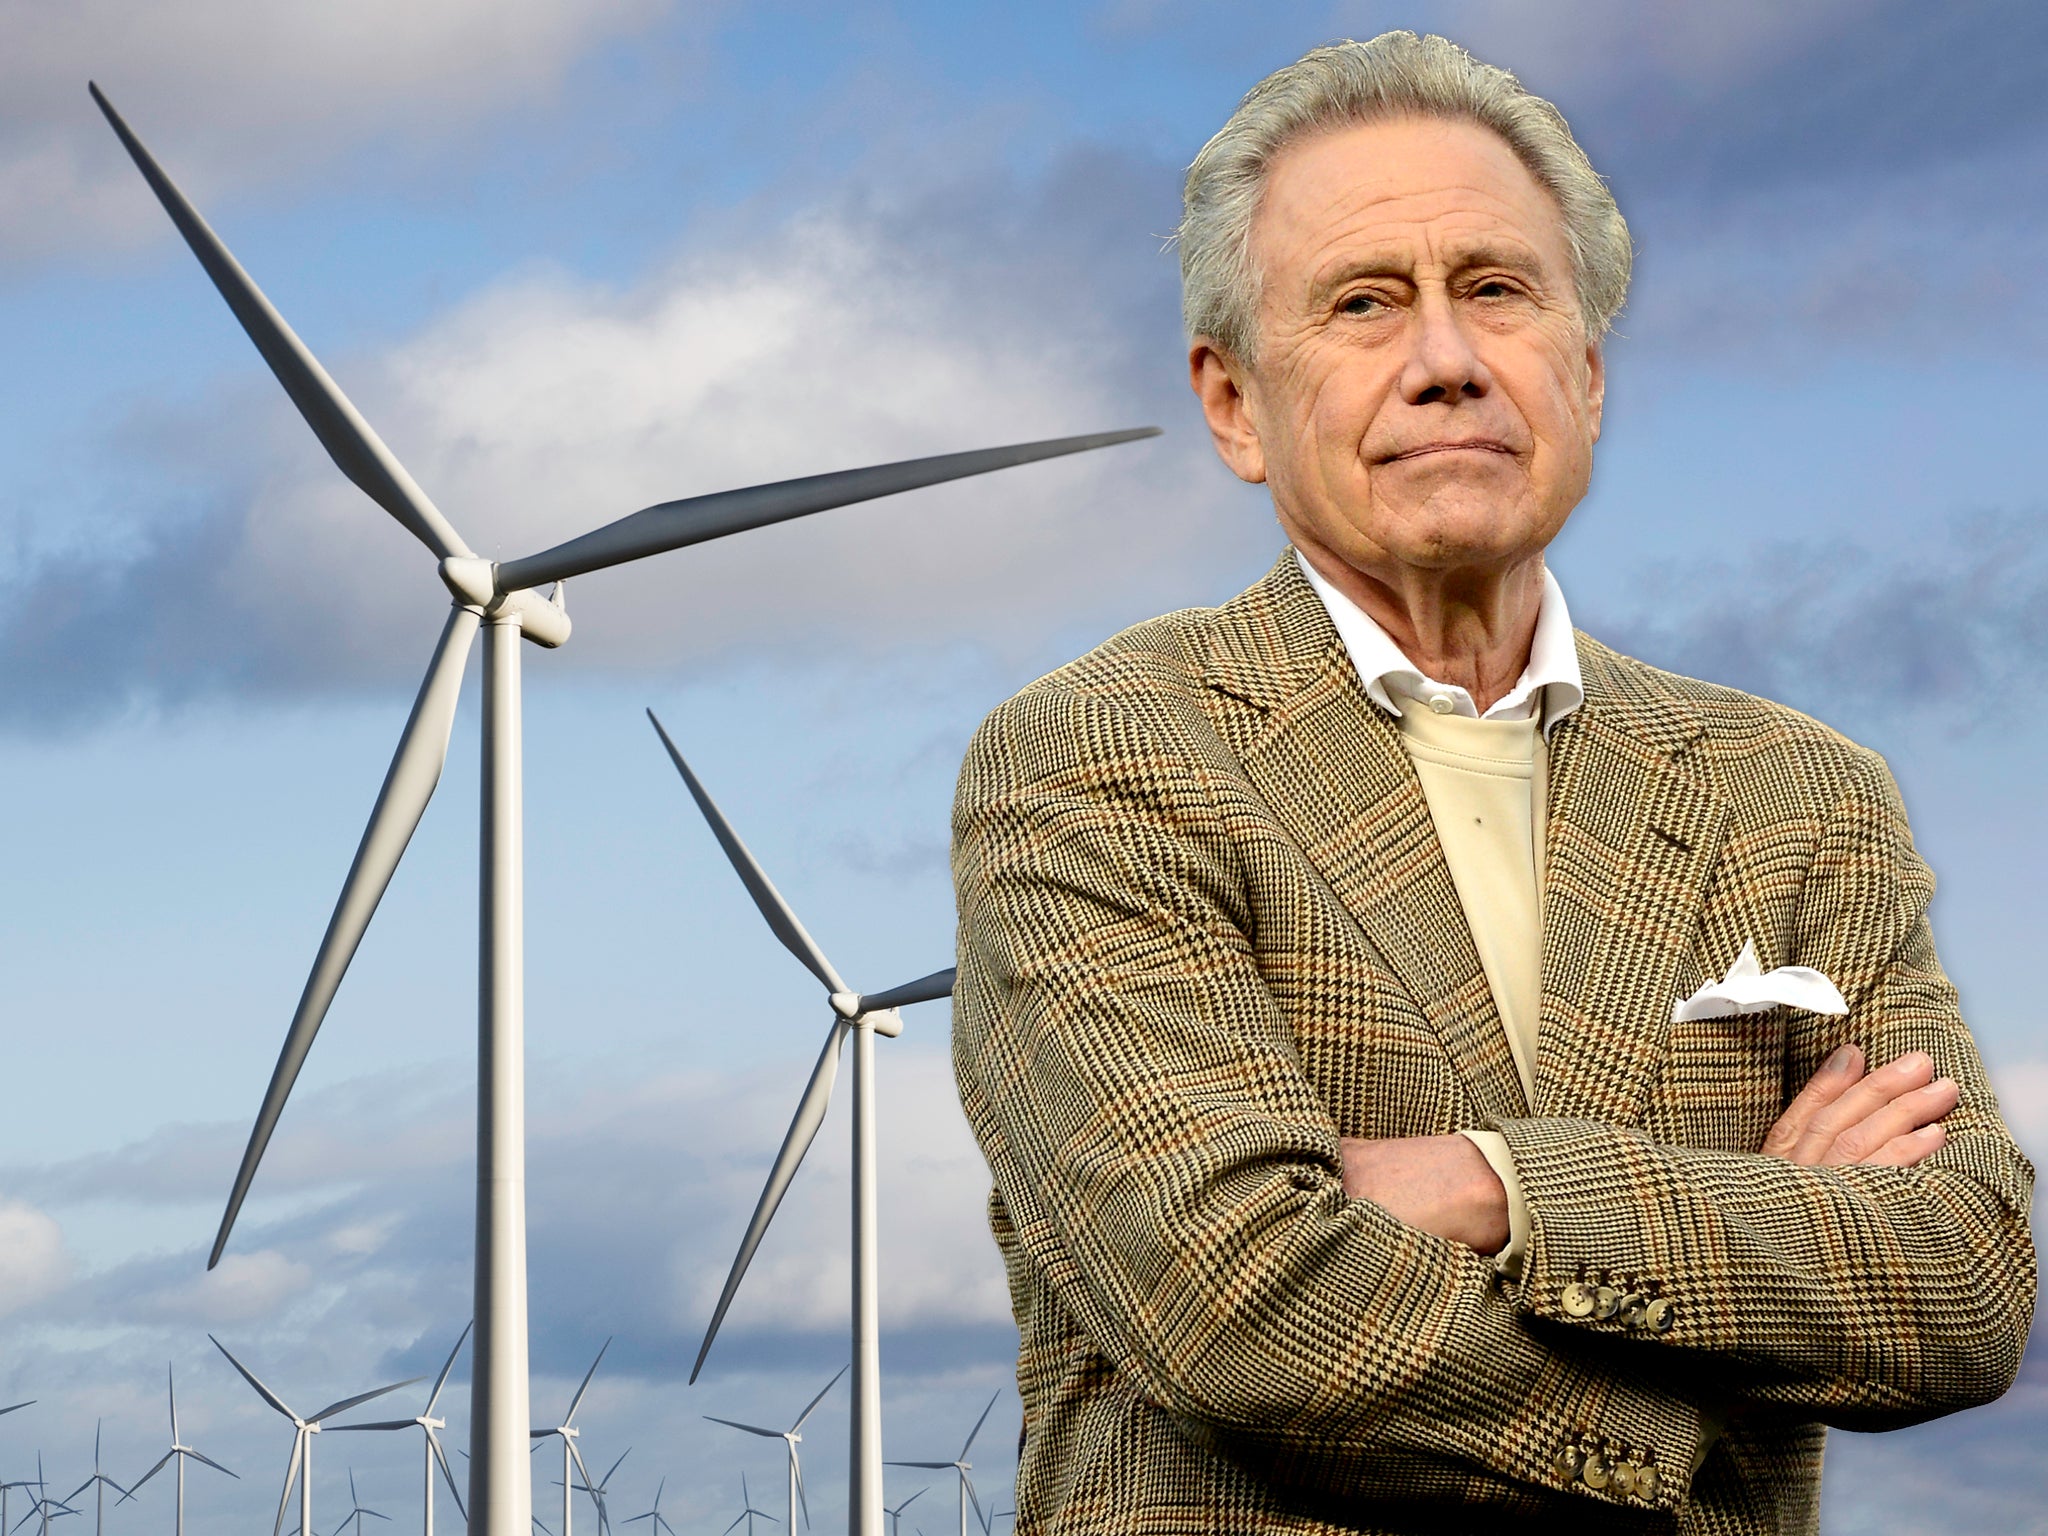 Saving the planet or making a buck? Why is a fossil fuel tycoon building  America's biggest wind farm